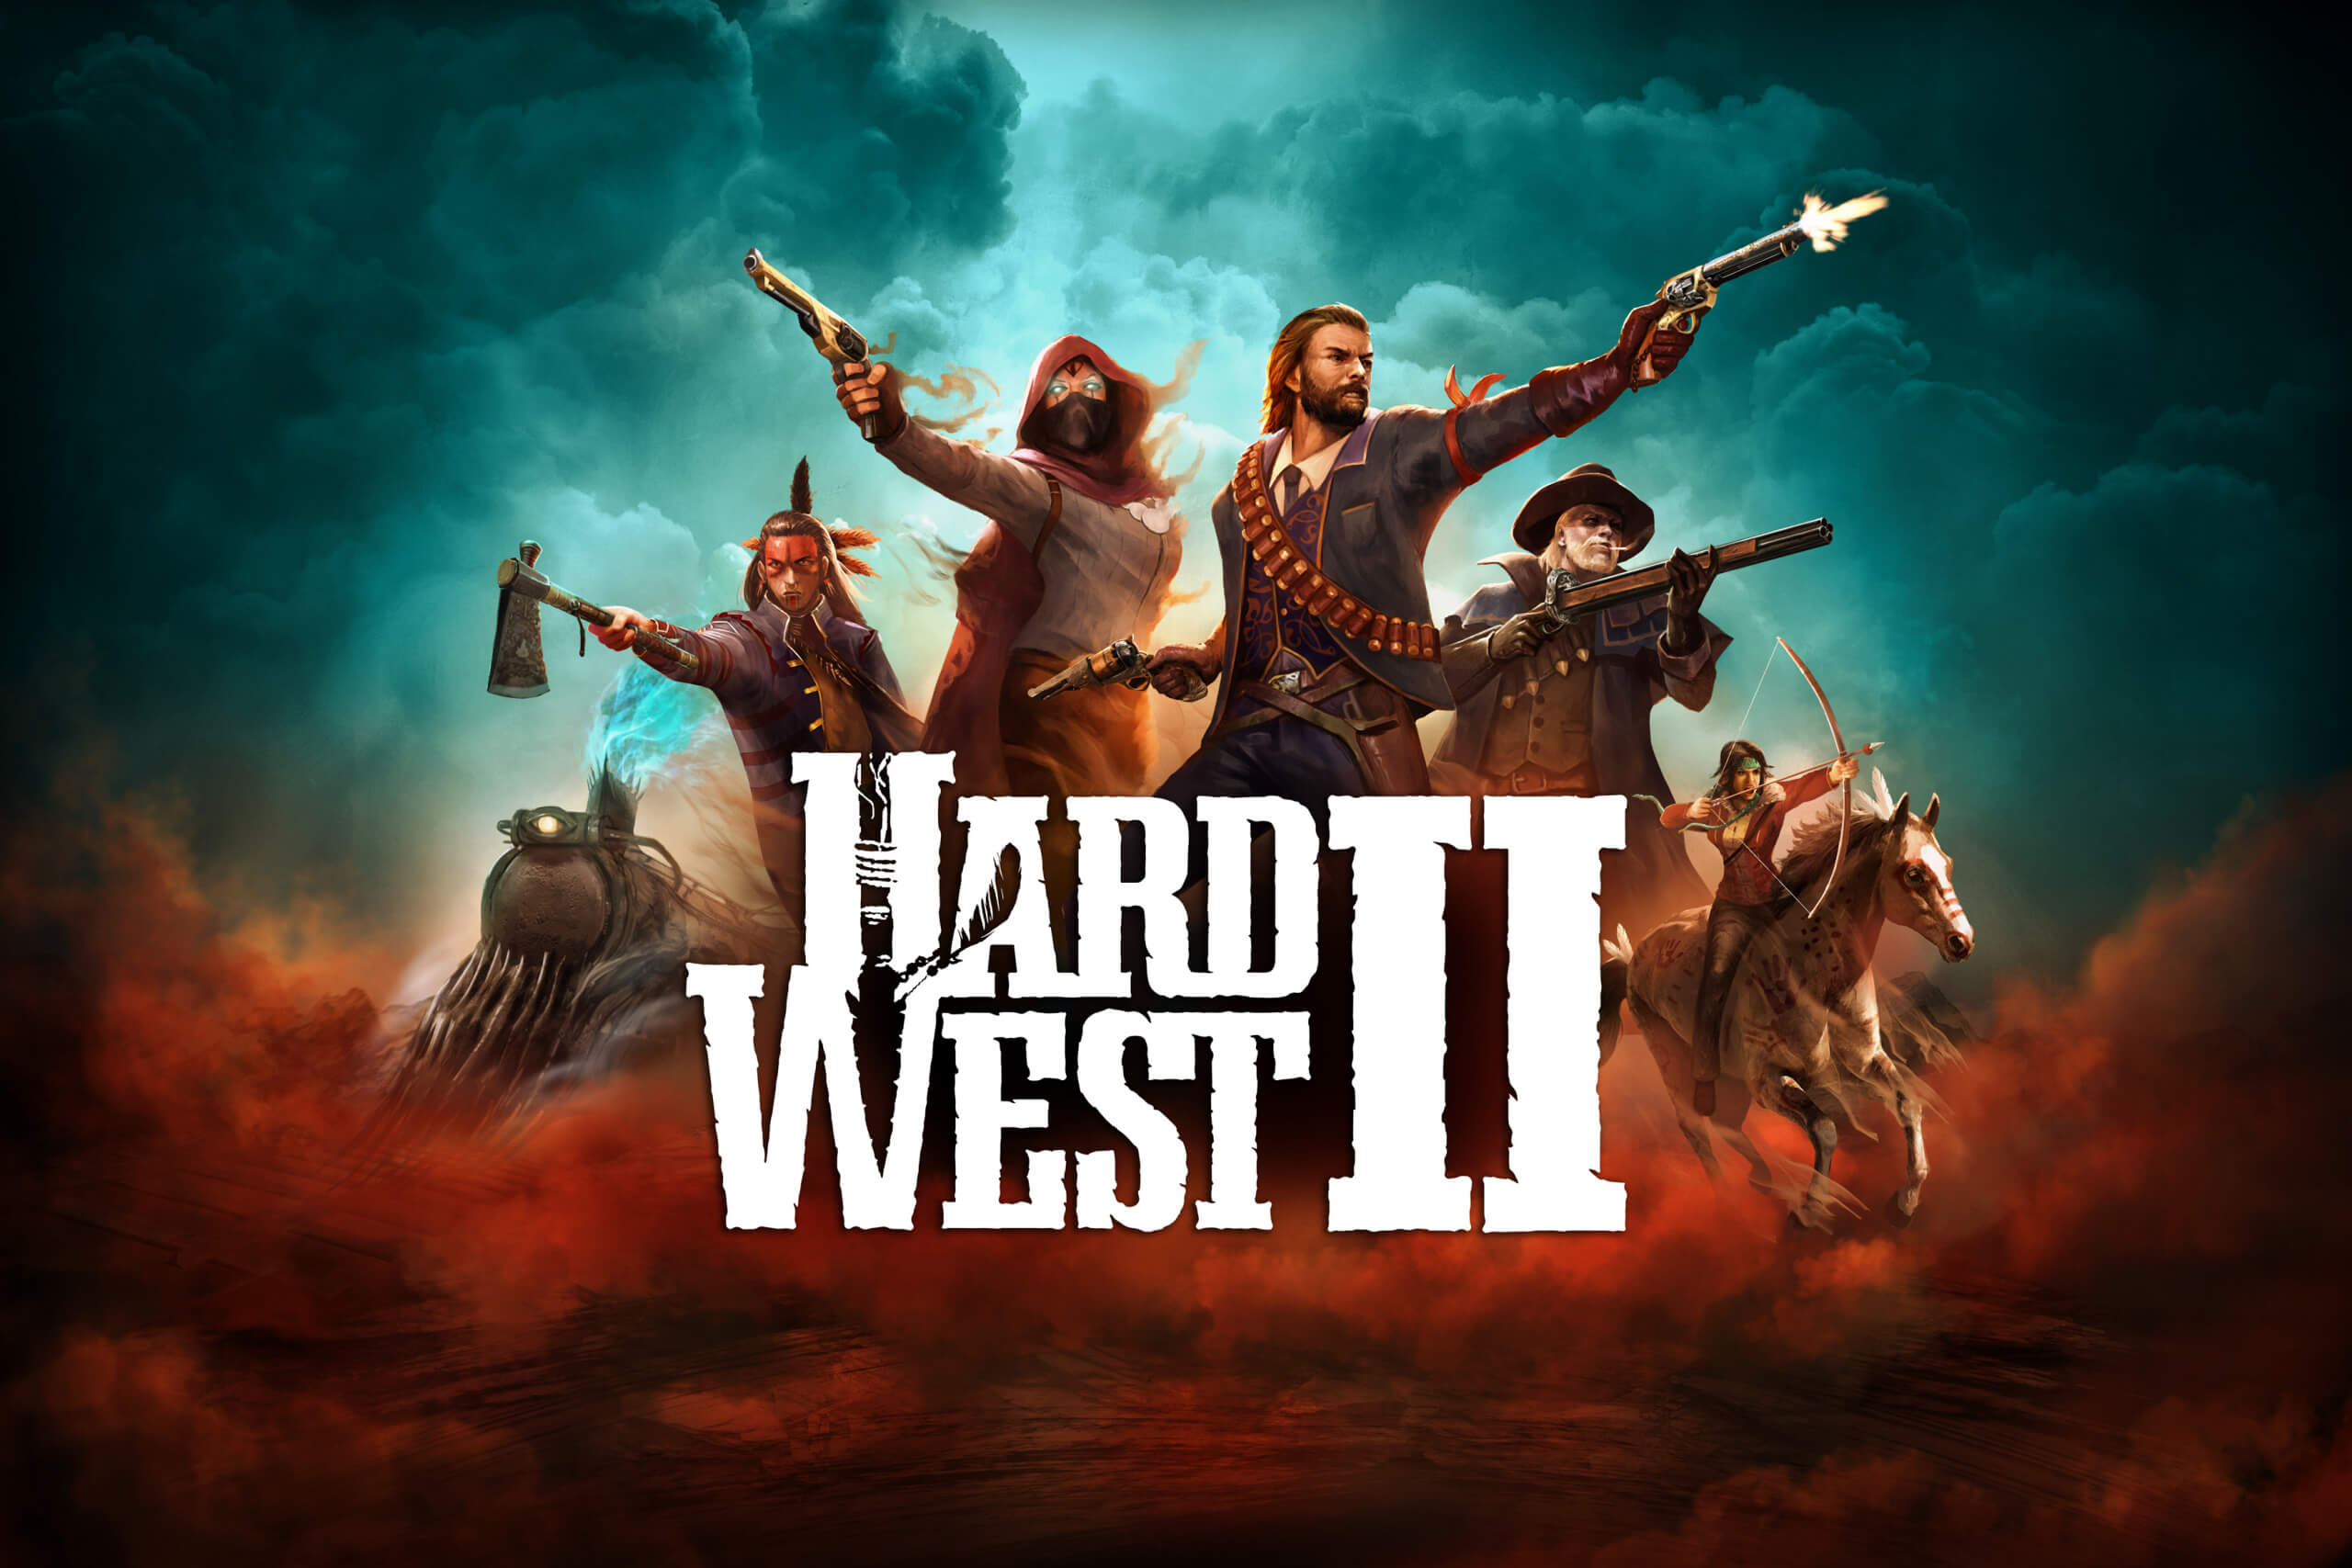 Hard West 2 Launches Aug. 4, 2022 on Steam & GOG